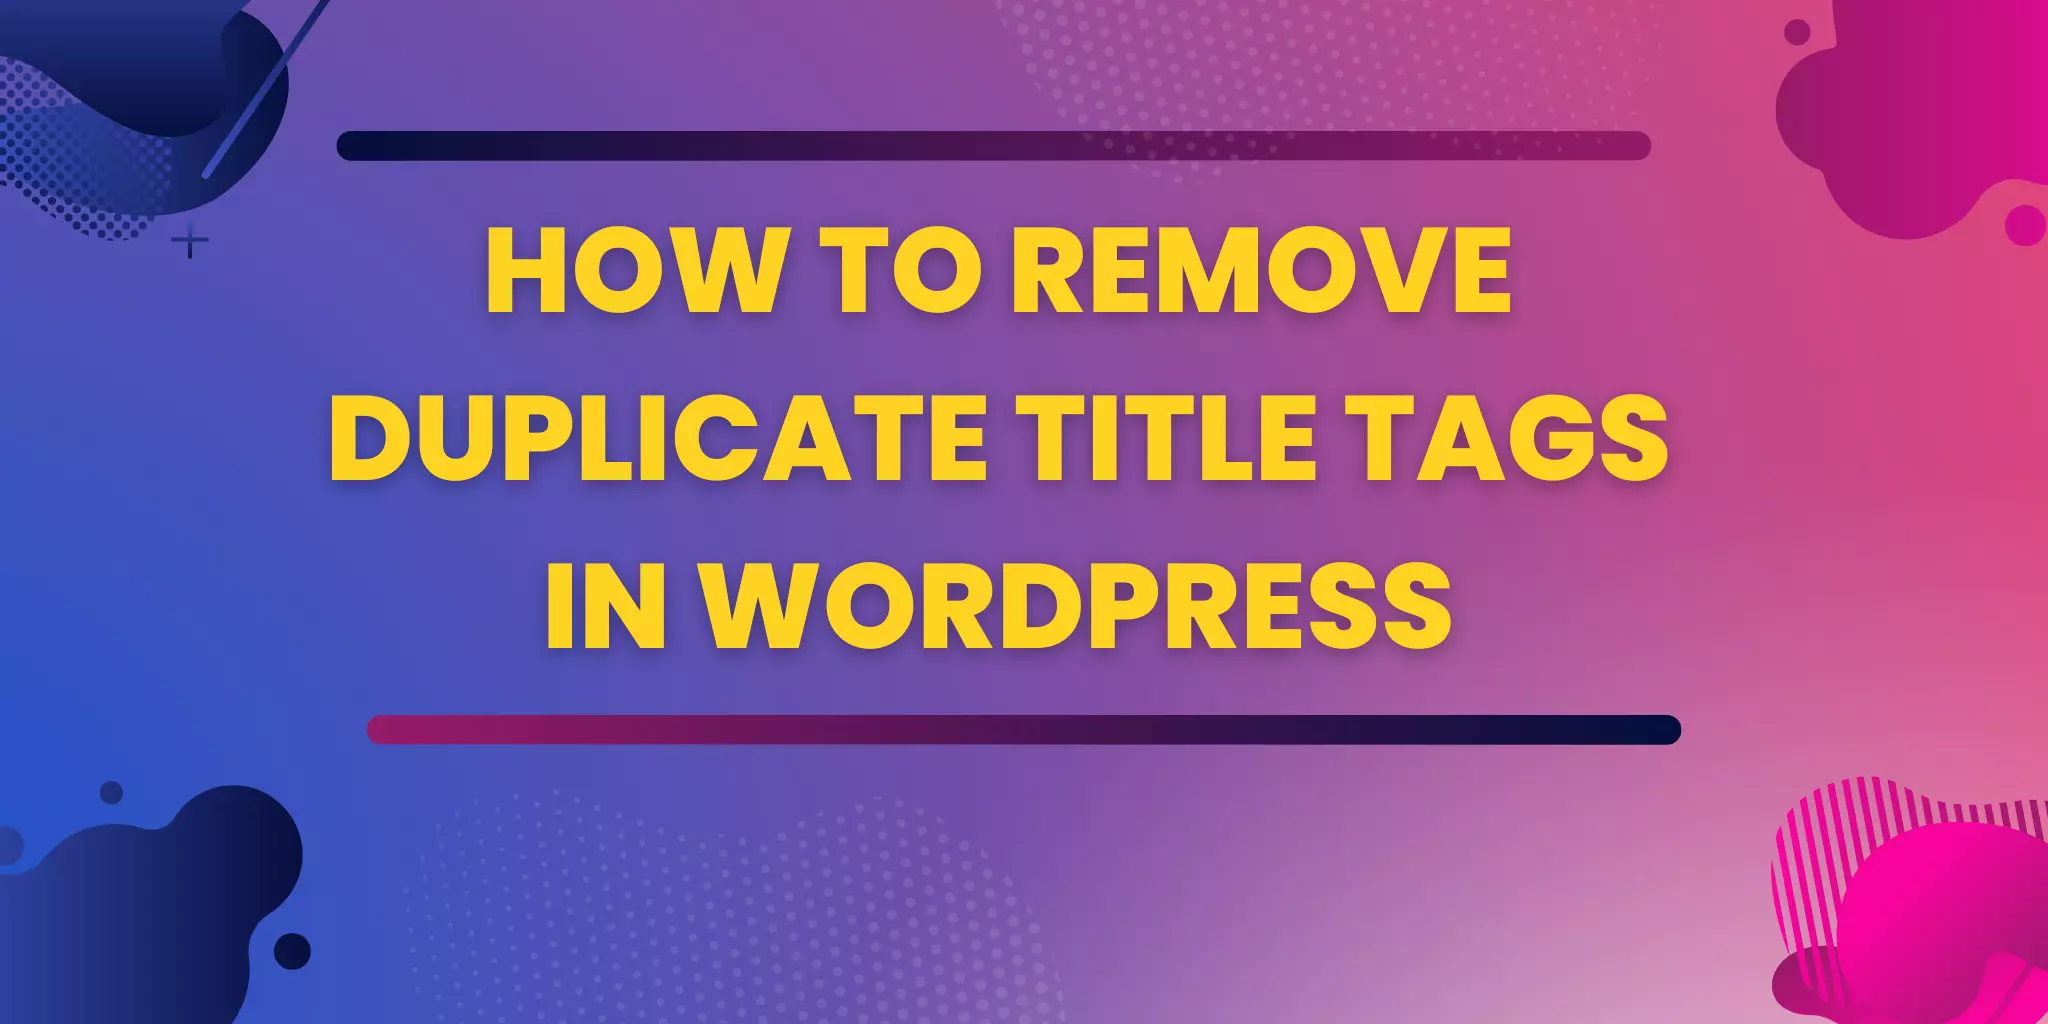 How to remove duplicate title tags in WordPress